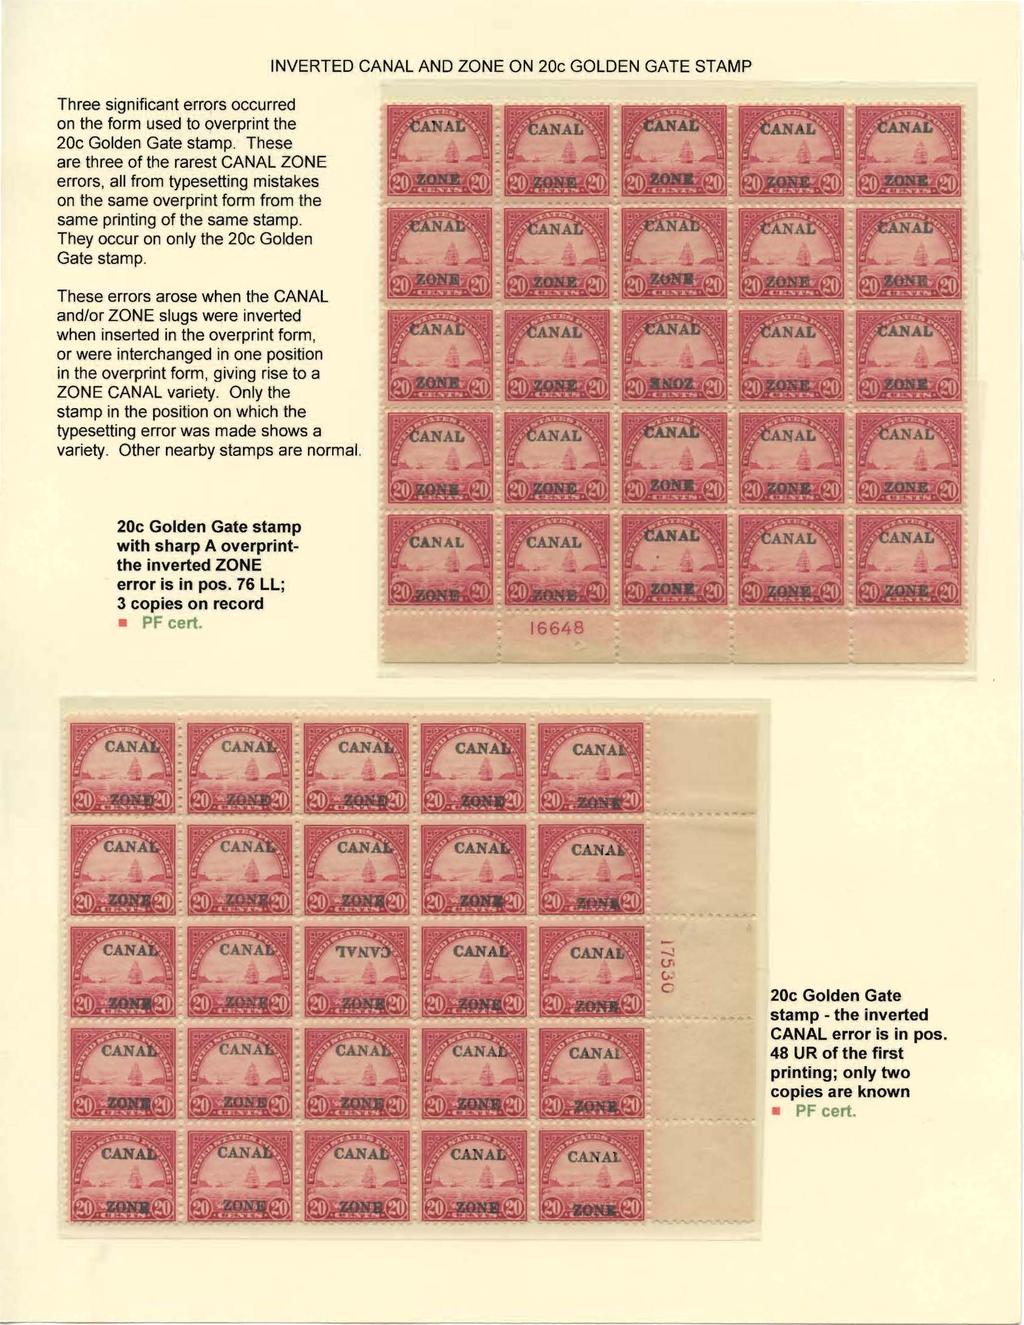 Three significant errors occurred on the form used to overprint the 20c Golden Gate stamp.